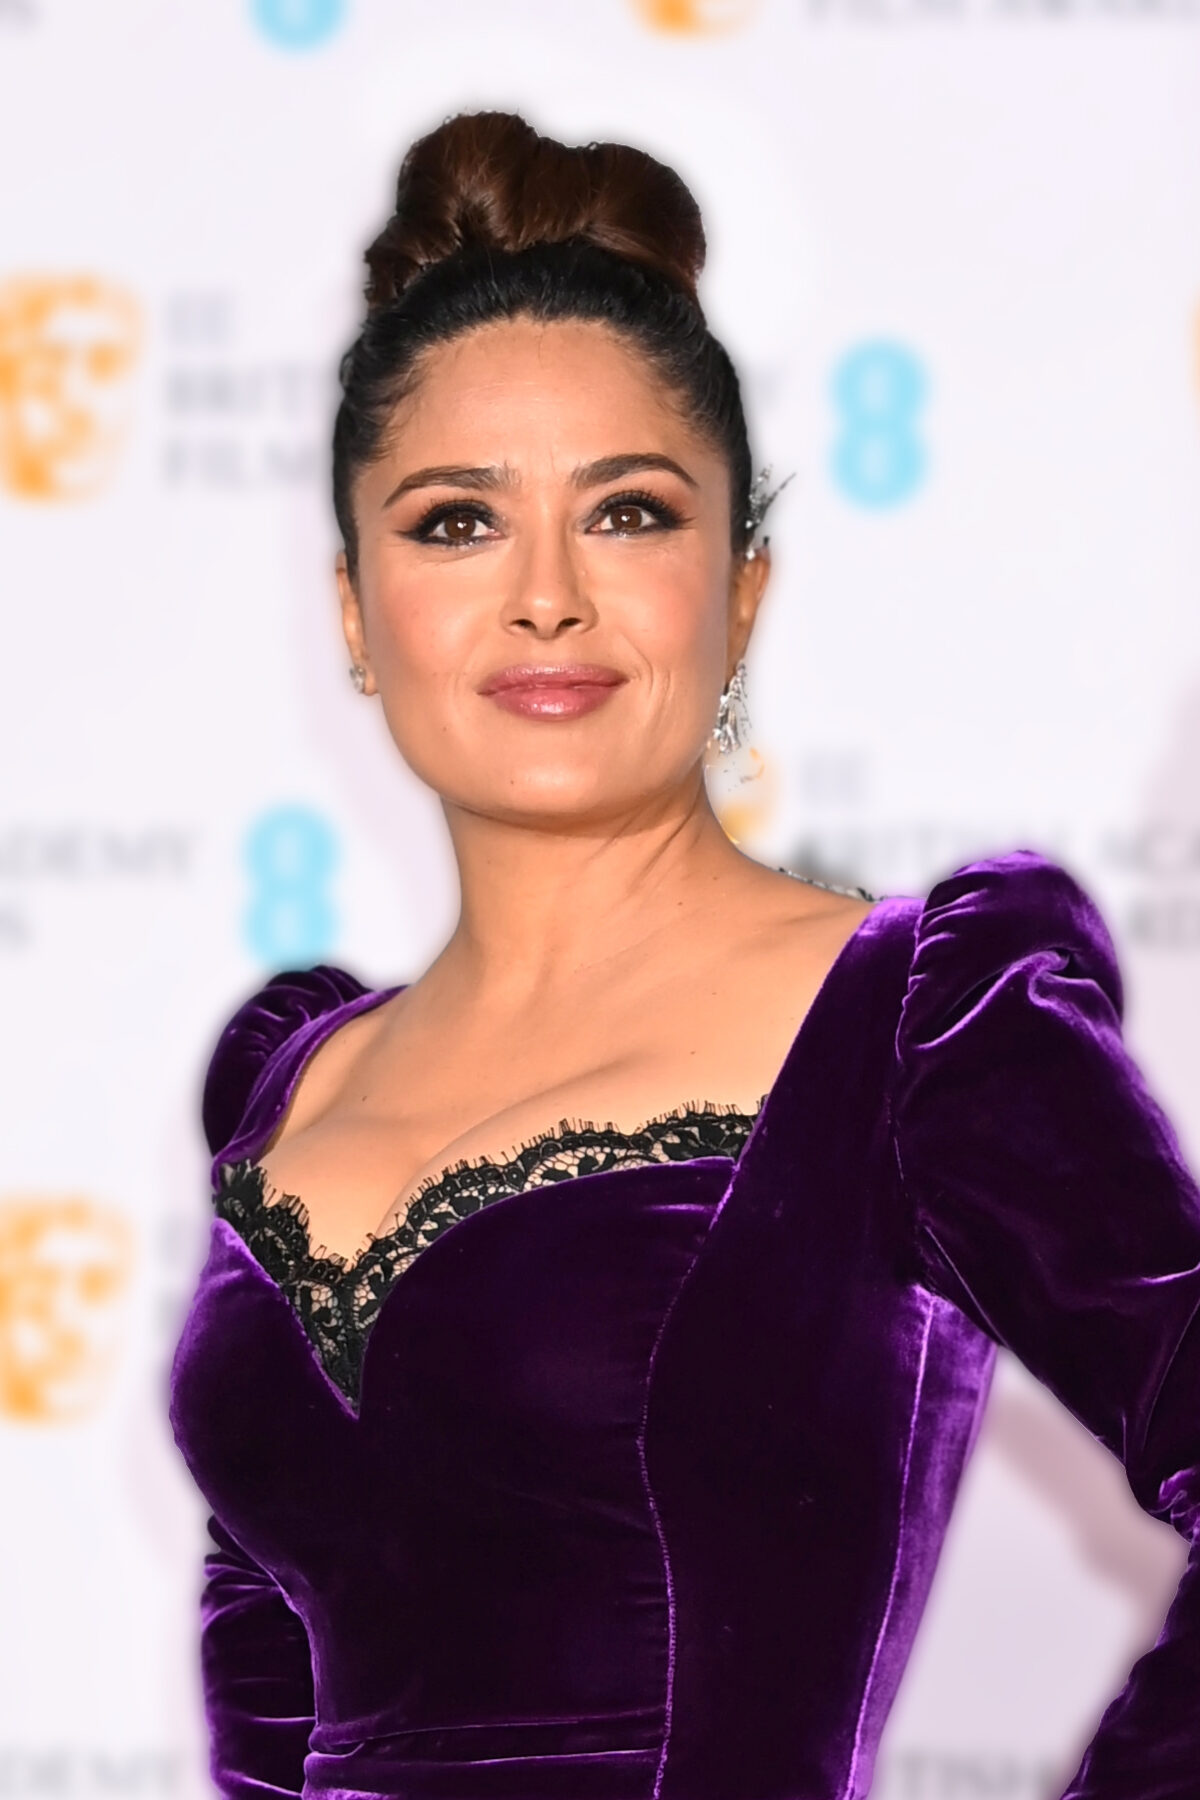 LONDON, ENGLAND - MARCH 13: Salma Hayek poses in the Winners Room at the EE British Academy Film Awards 2022 at Royal Albert Hall on March 13, 2022 in London, England. (Photo by Dave J Hogan/Getty Images)